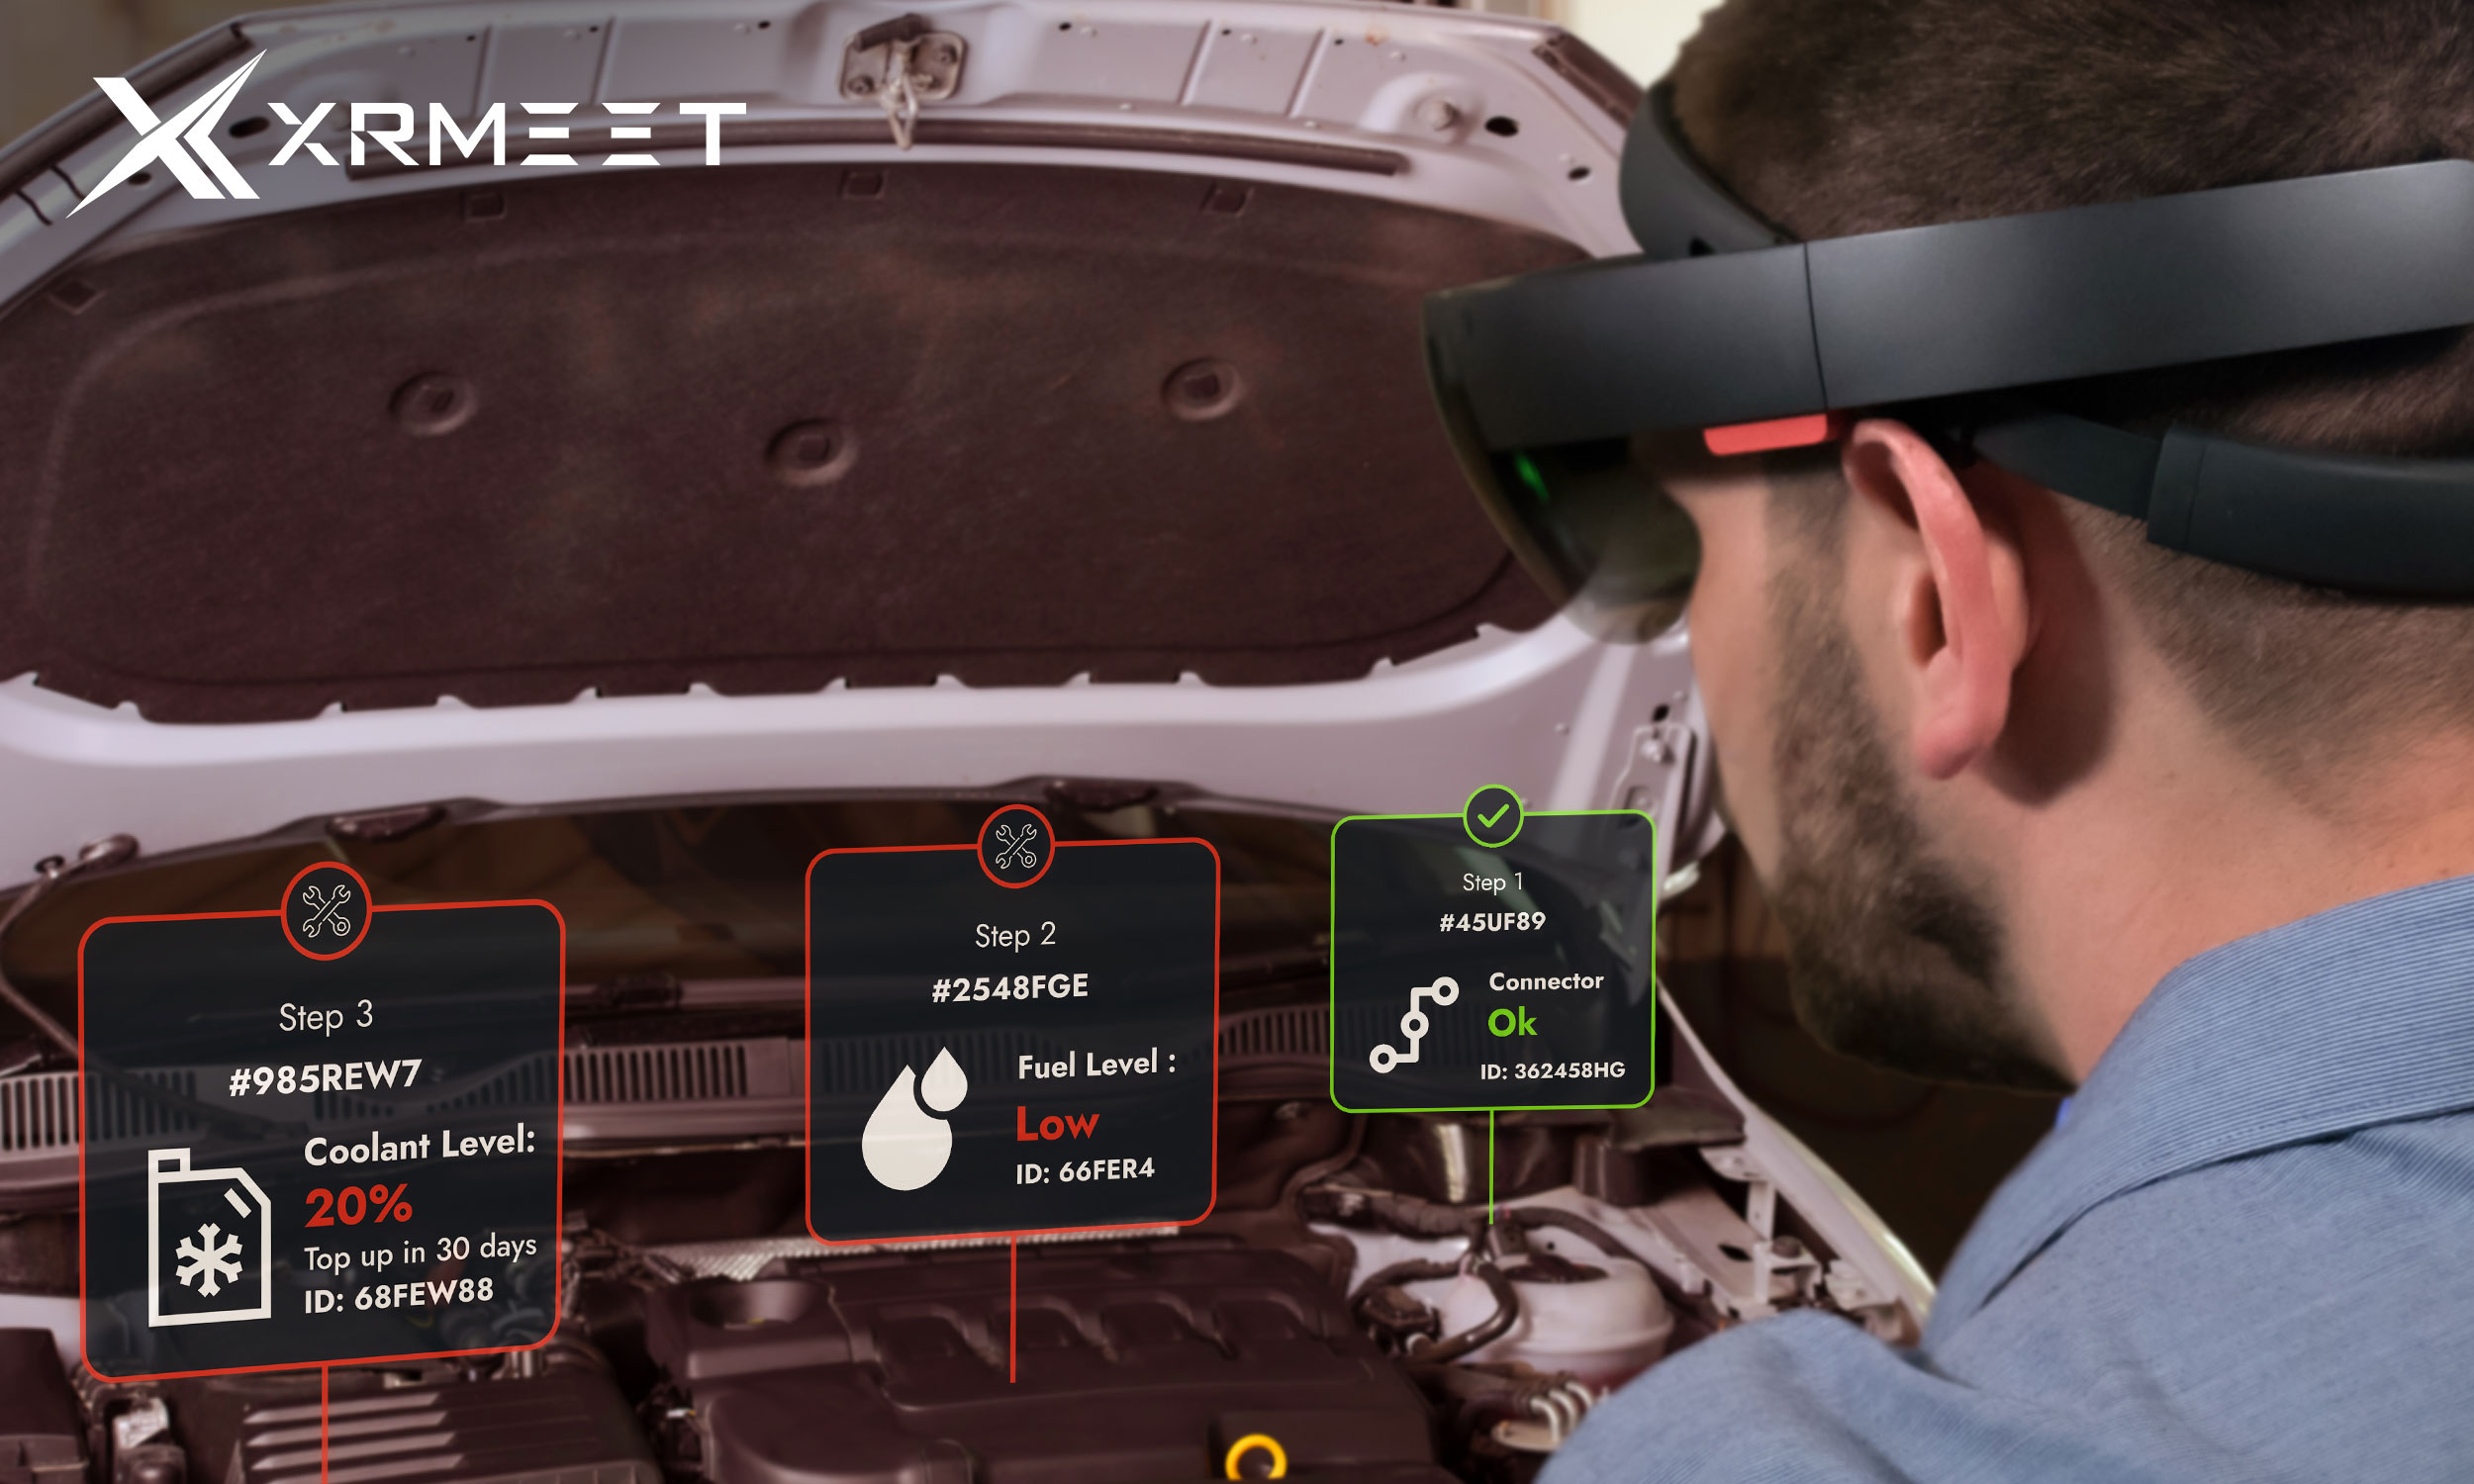  After-Sales Digitalization  Through Augmented Reality in Automotive Industry